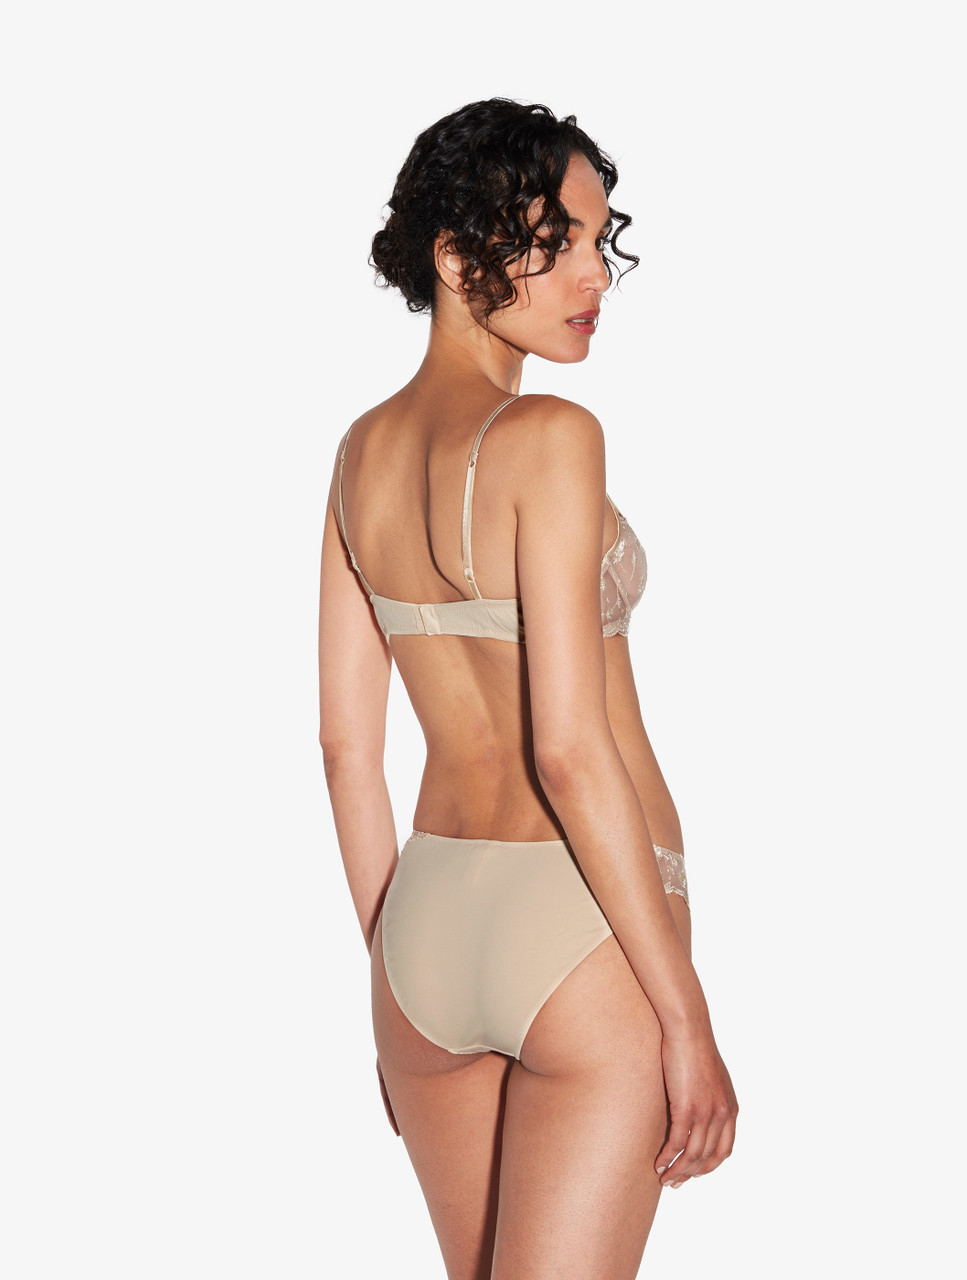 Balconette Bra in Halo and Ivory Nude with embroidered tulle